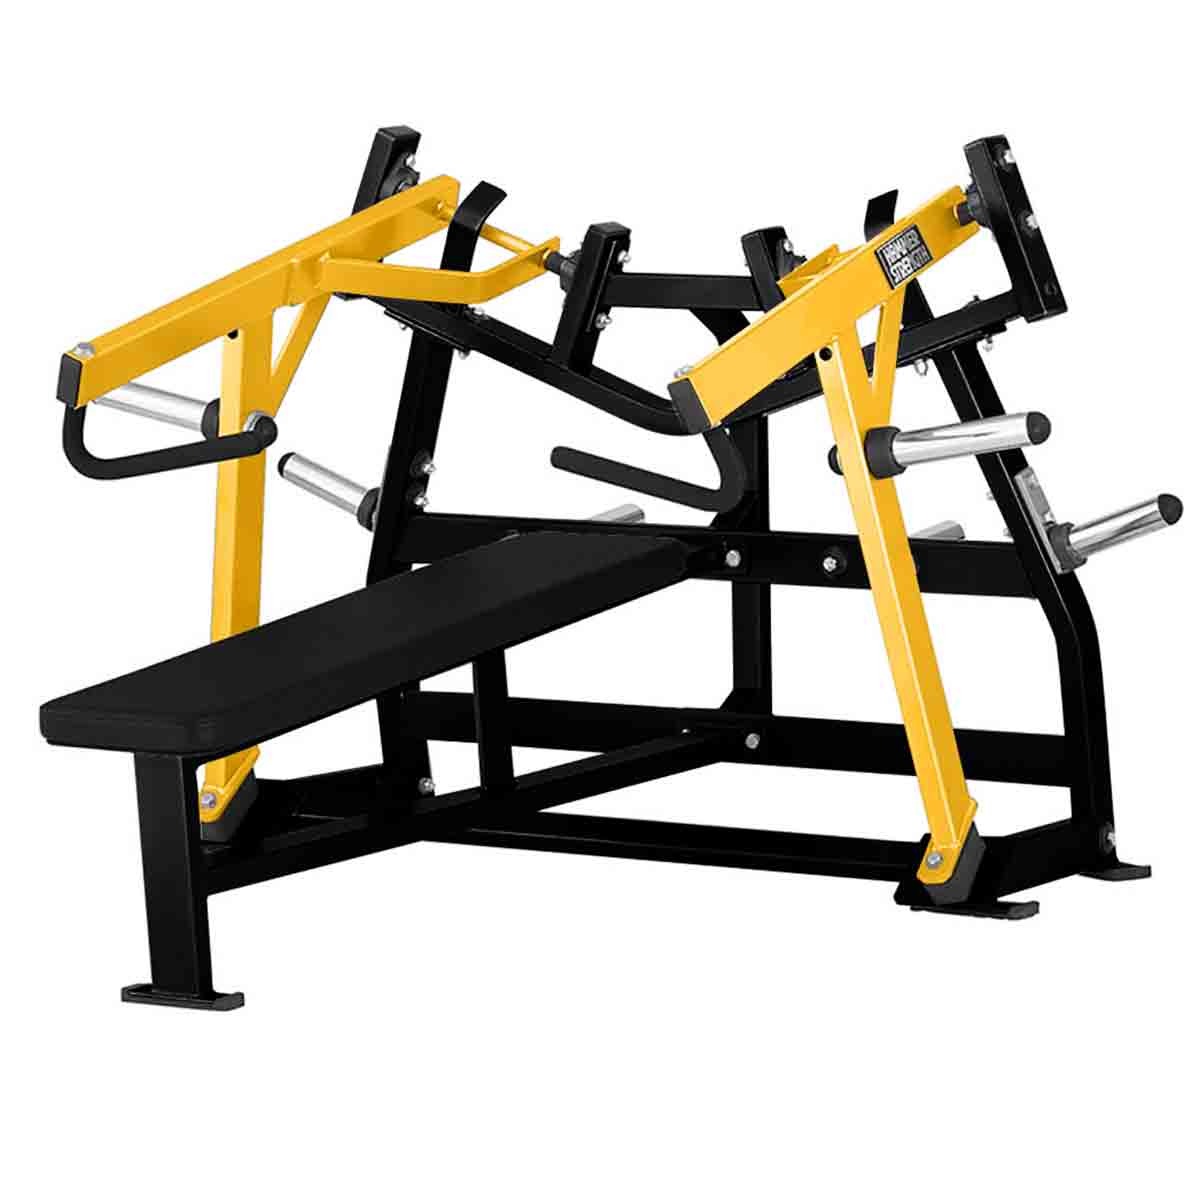 Hammer Strength Plate Loaded Lateral Bench Press | Used Equipment